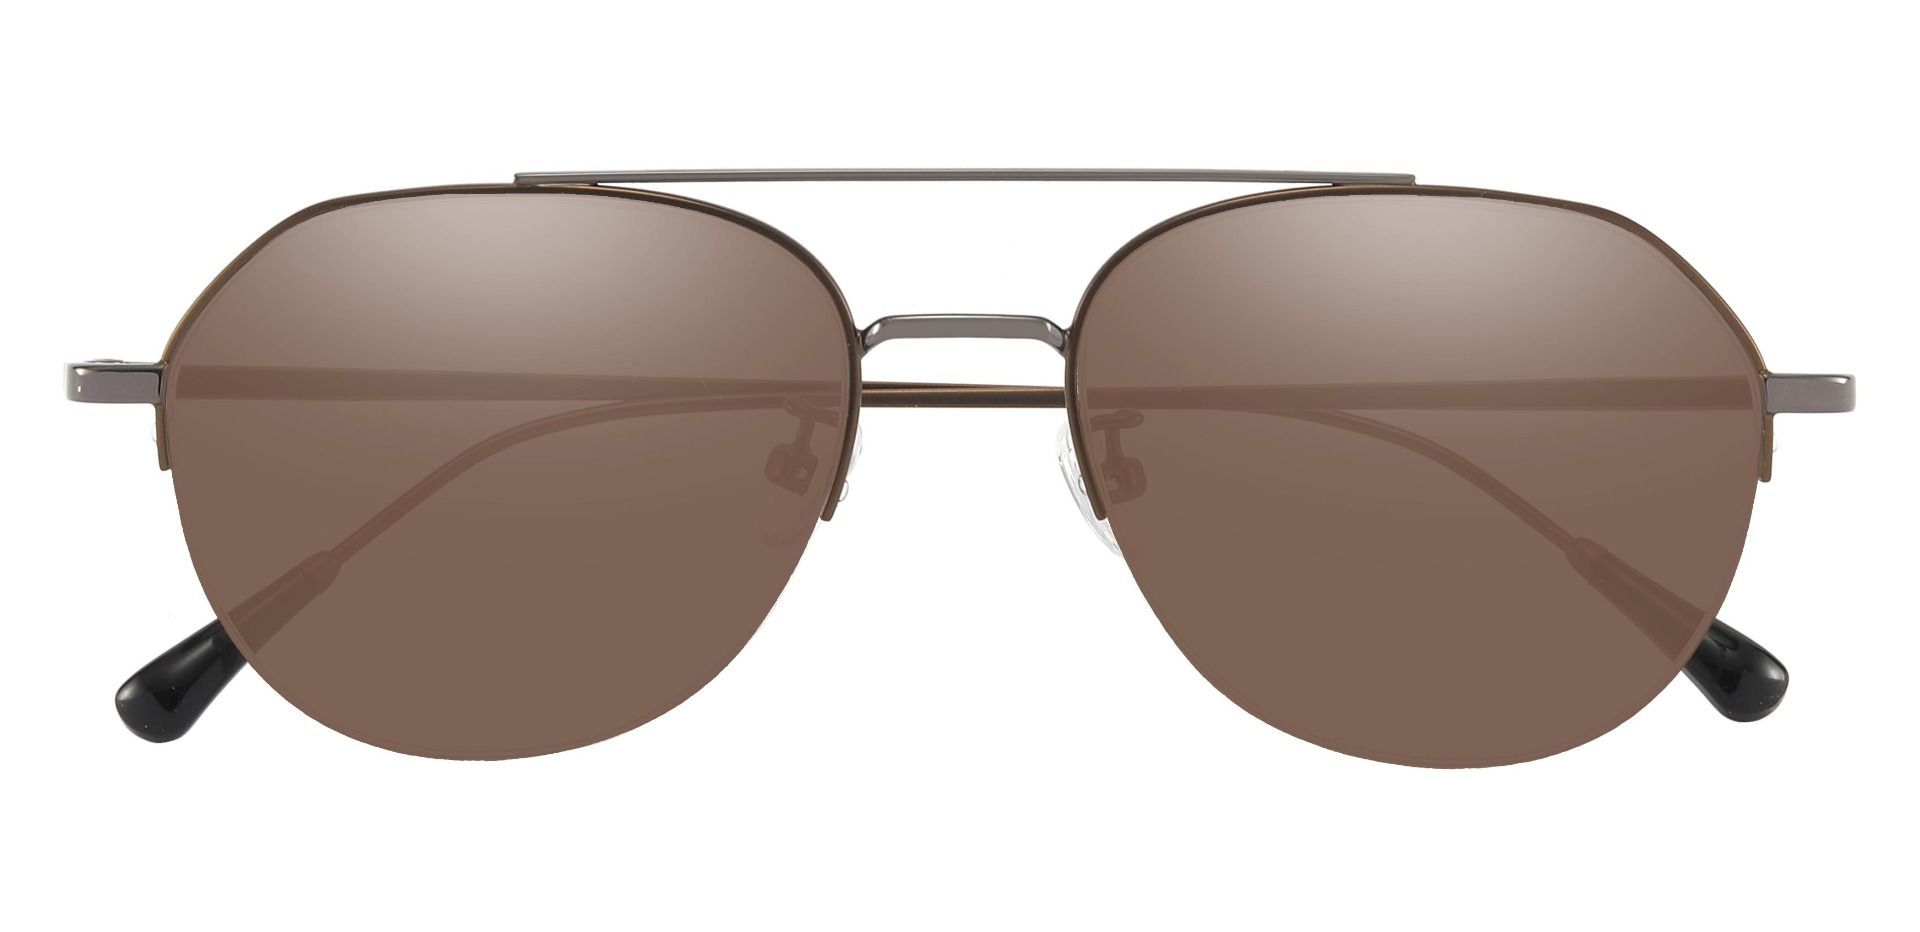 Waldorf Aviator Lined Bifocal Sunglasses - Brown Frame With Brown Lenses